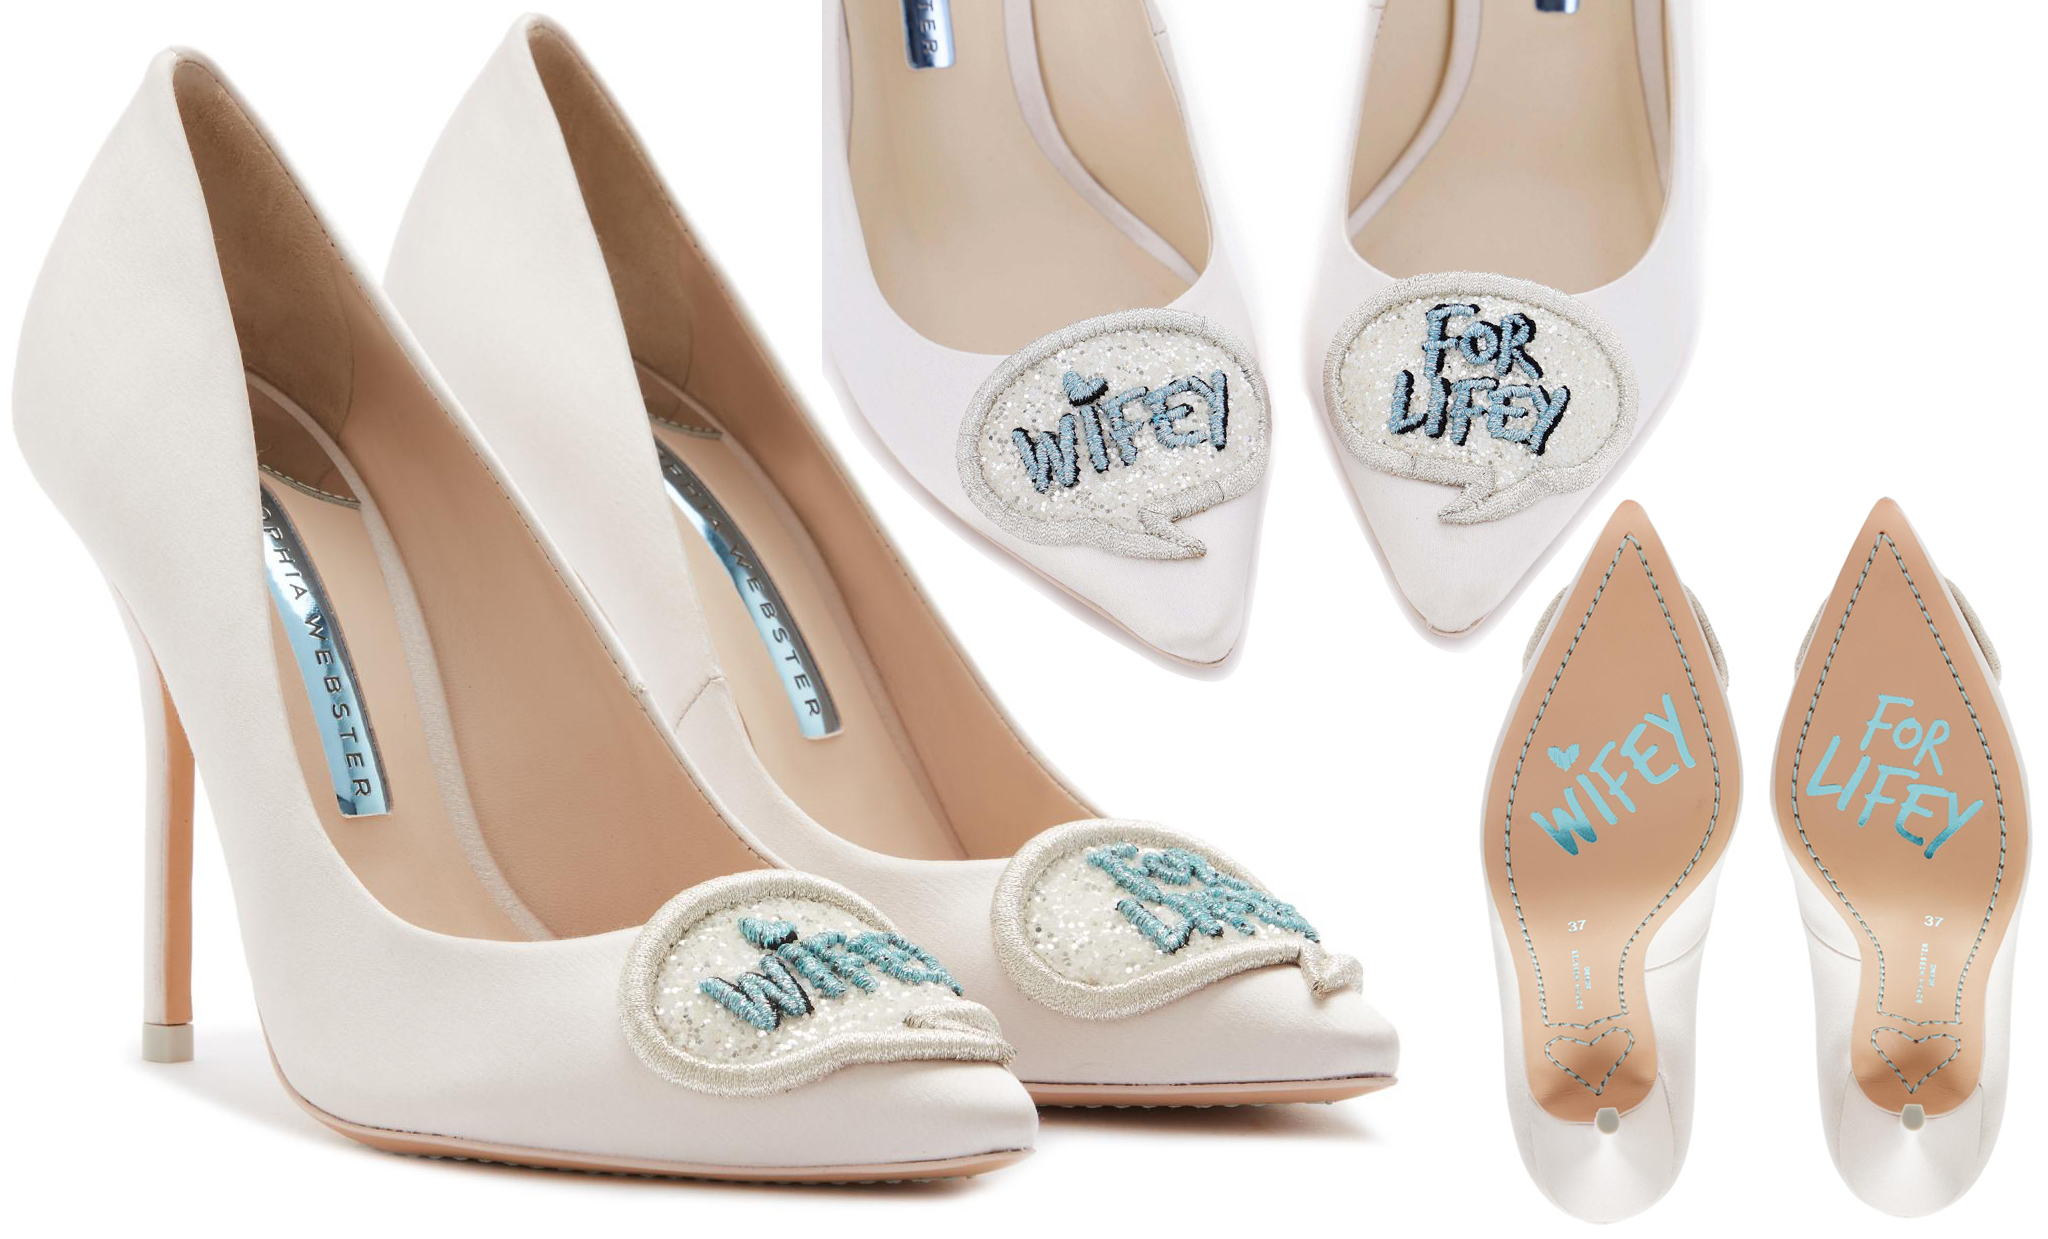 Make a statement on your wedding day in Sophia Webster's popular Wifey for Lifey pumps